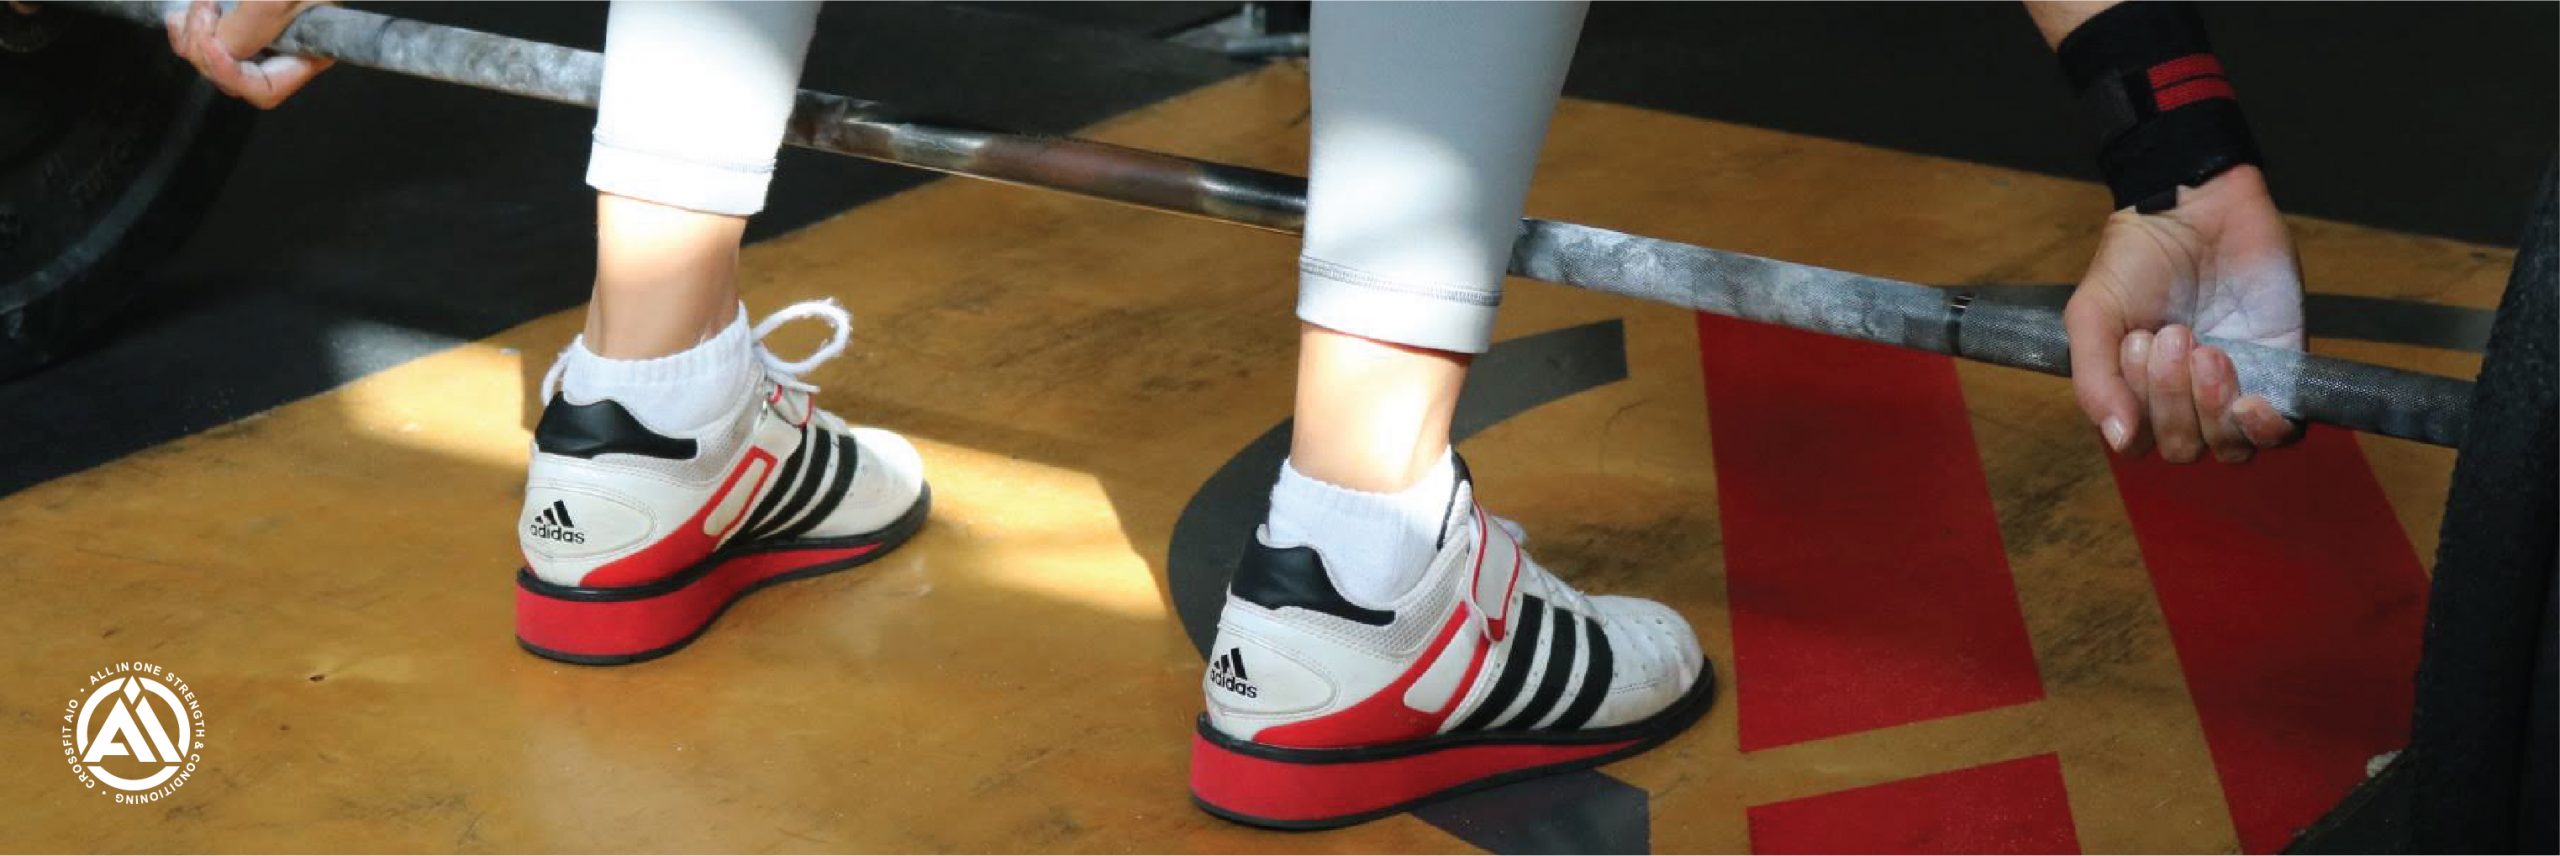 Do You Need CrossFit Shoes to Do CrossFit?